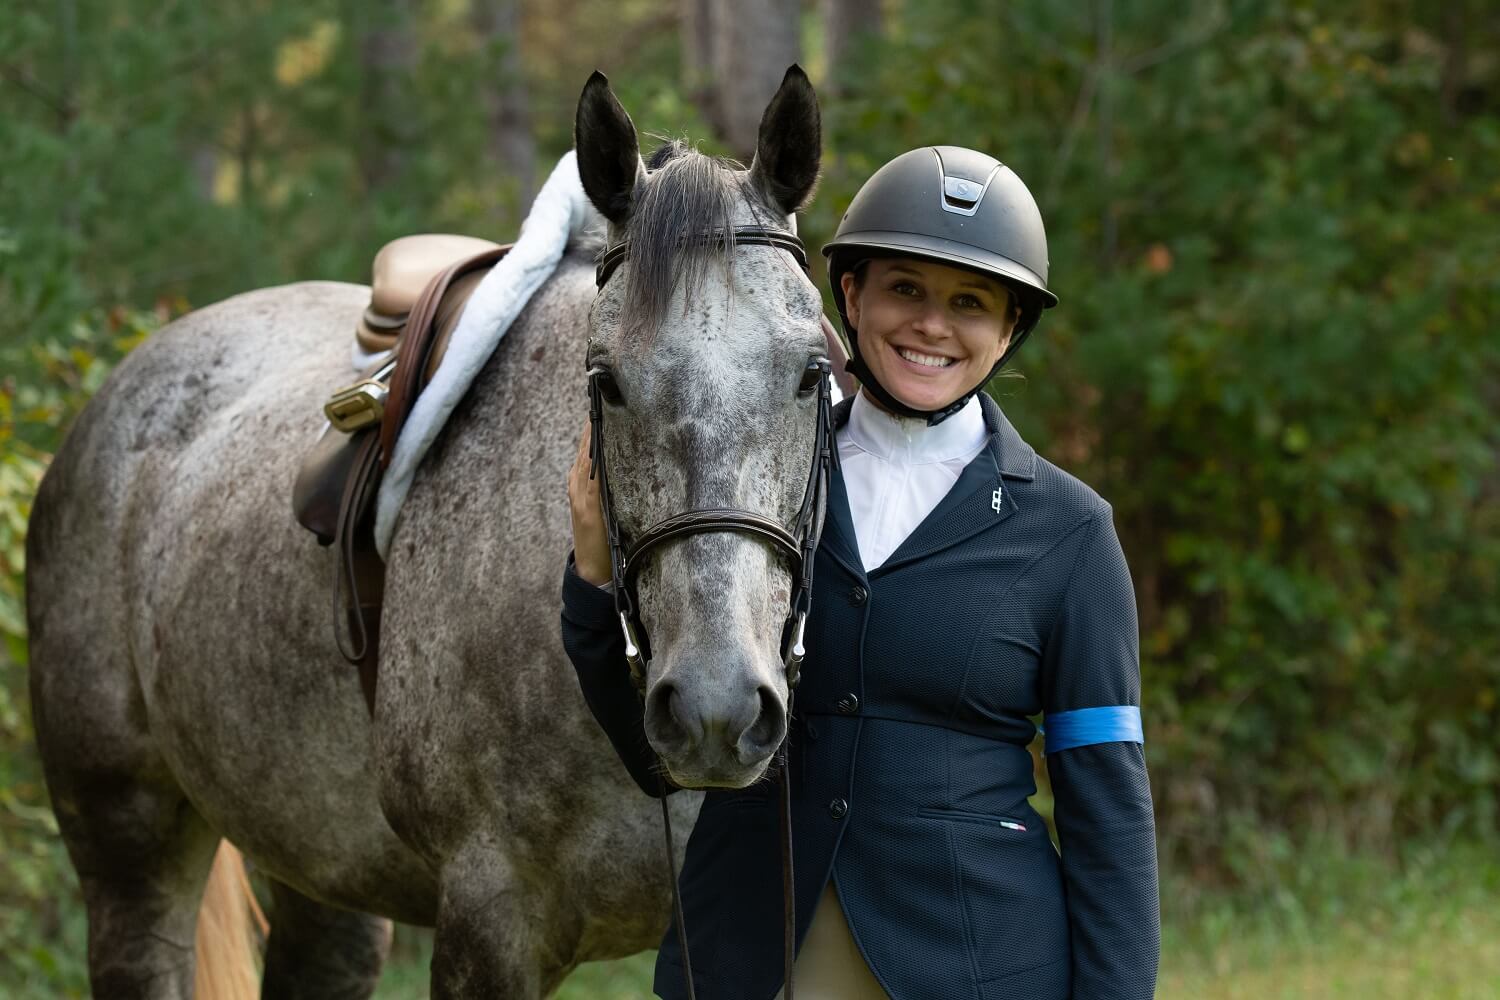 Maria smiling broadly next to a Thoroughbred horse named George